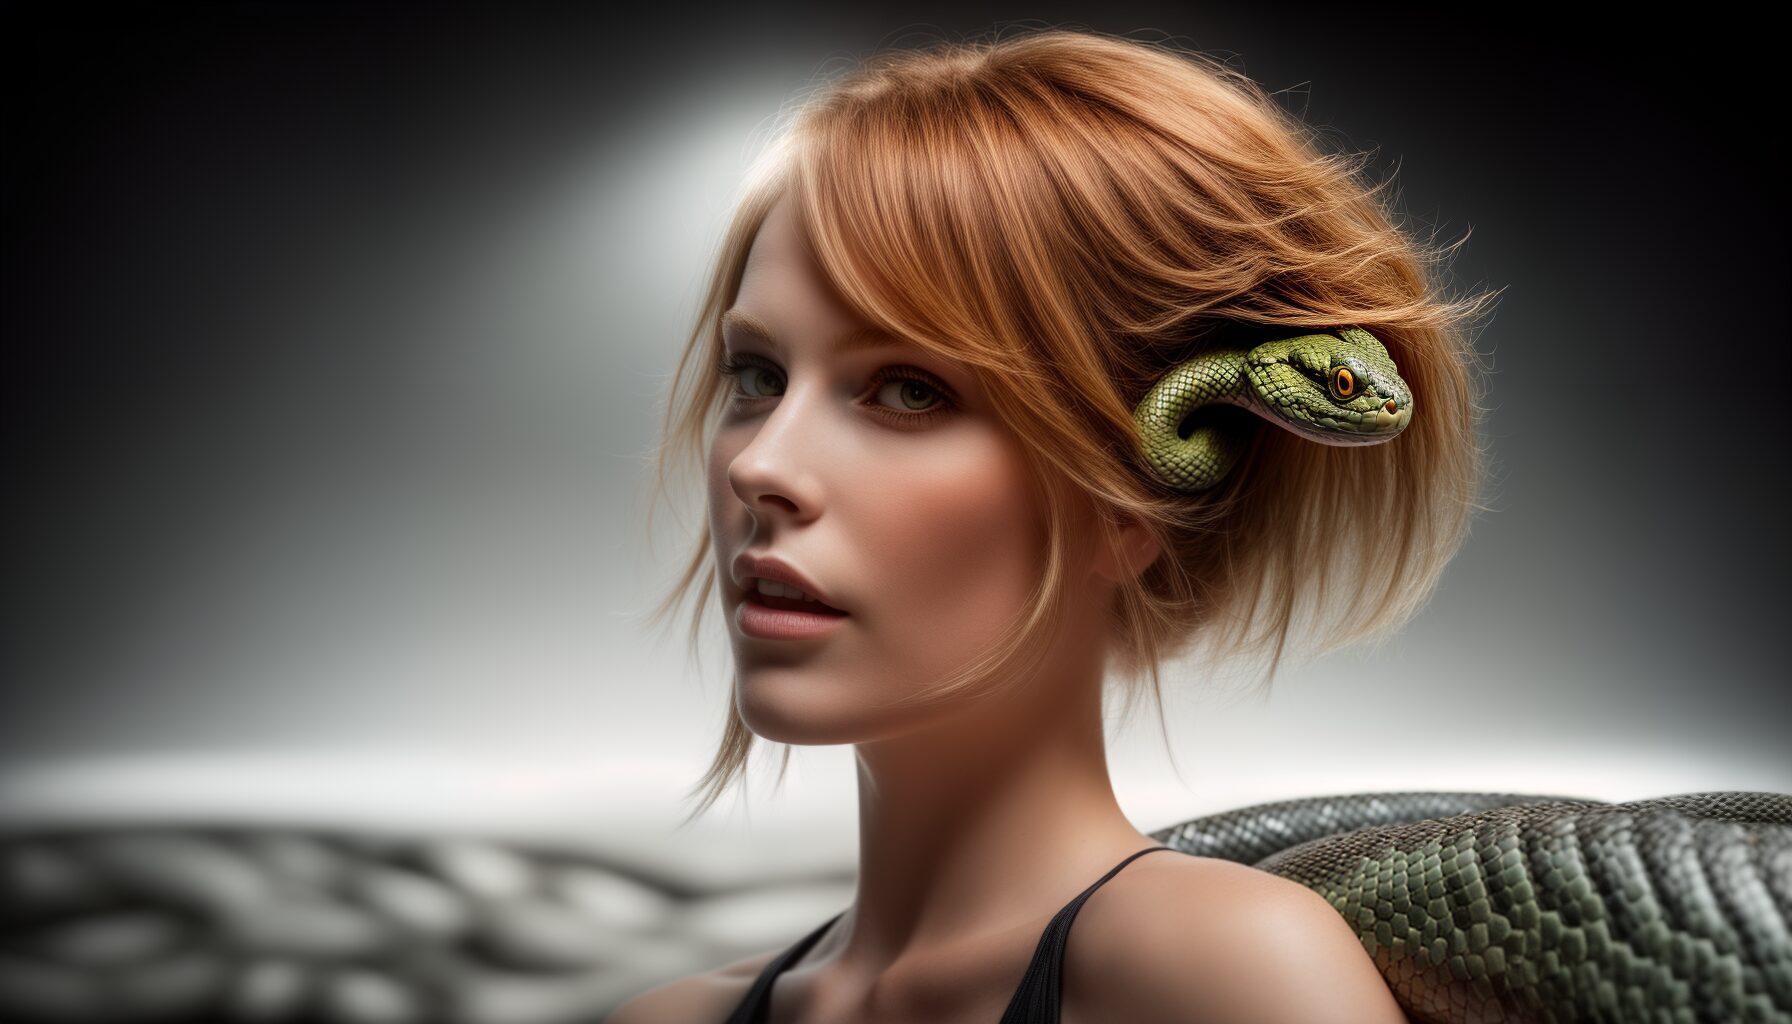 zodiac signs,snakes,dreaming,snake,about snake,meaning,what is,what is the meaning